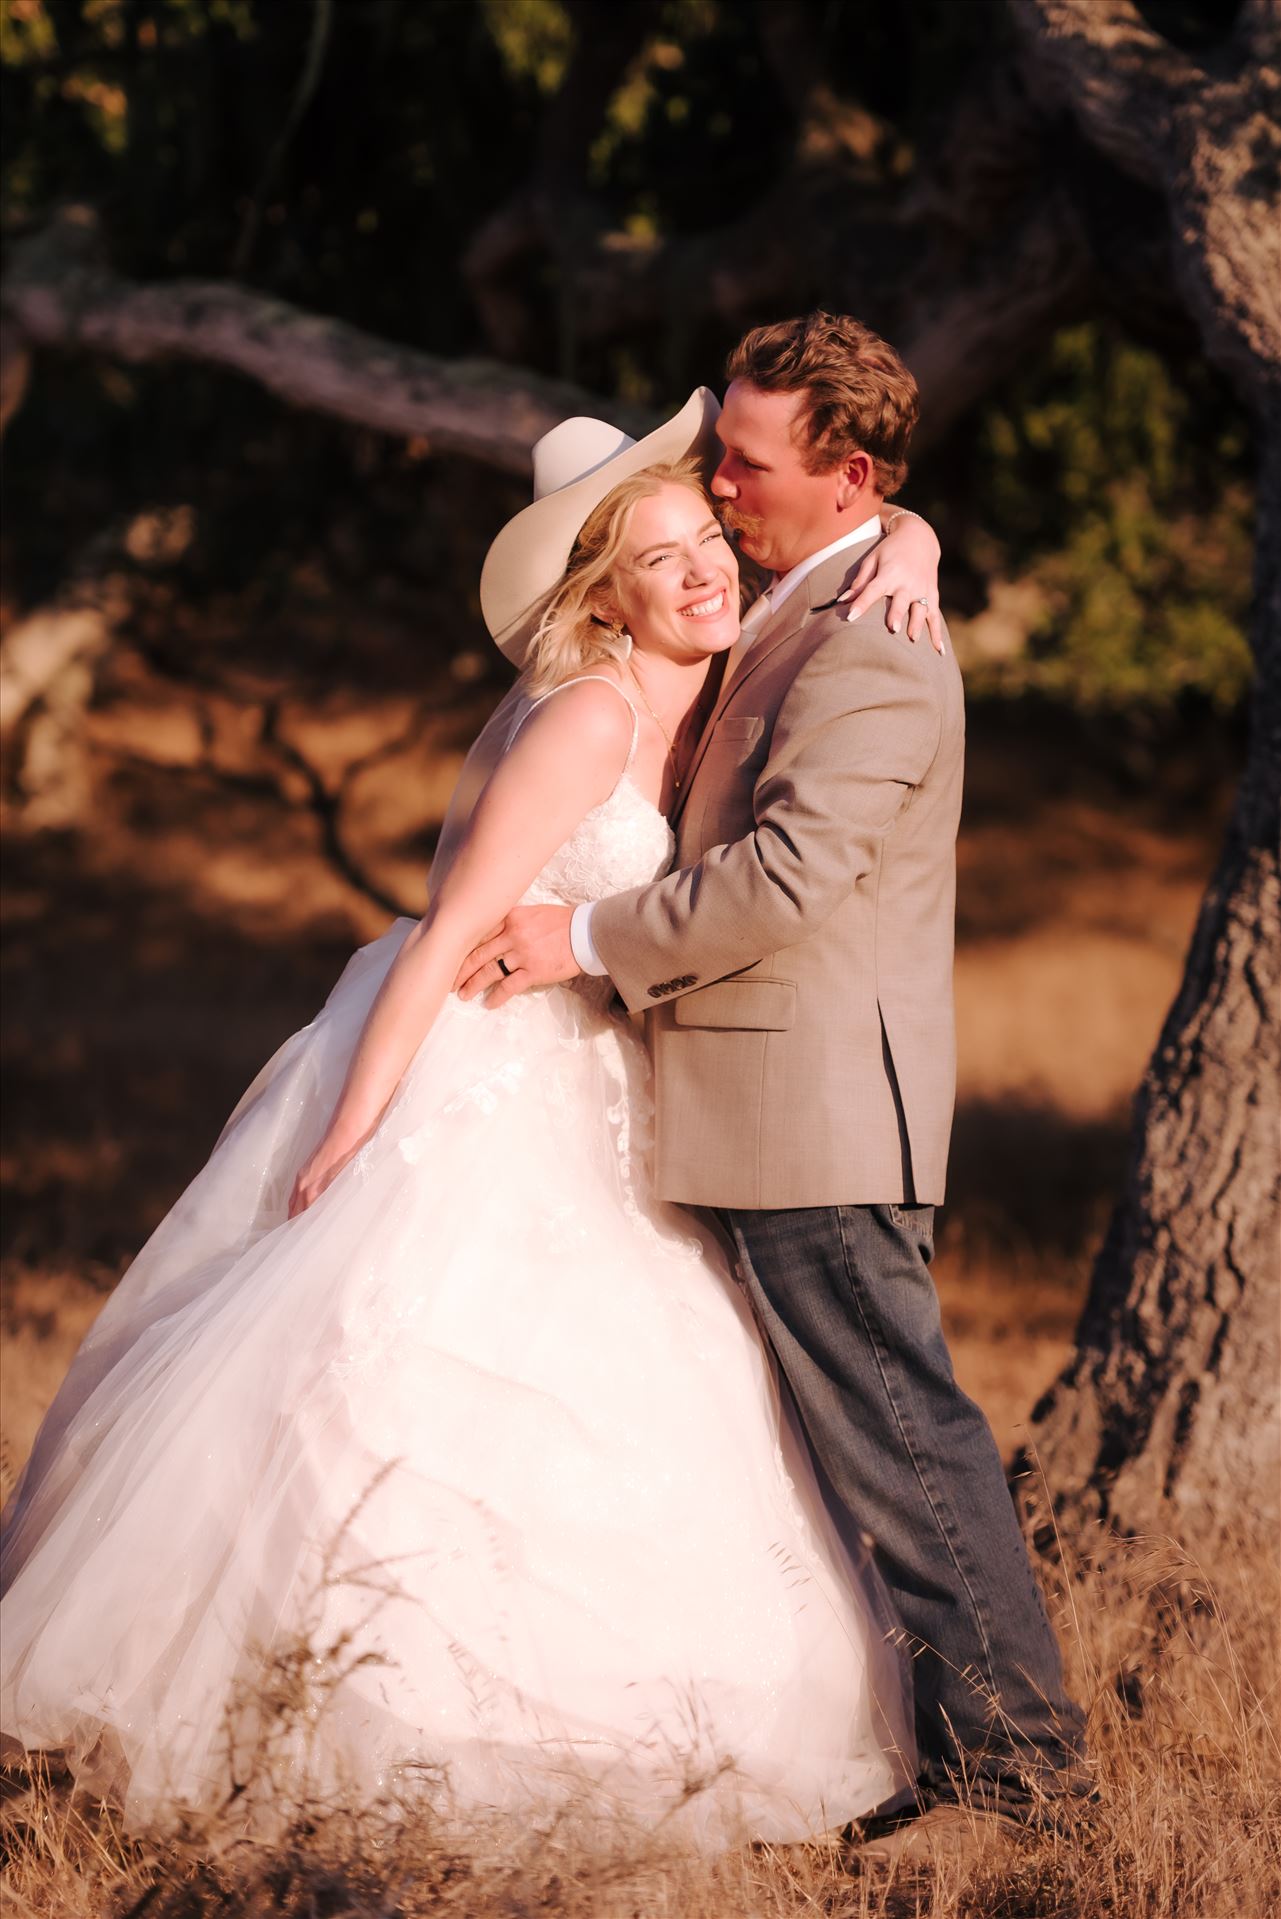 FW-6247.JPG - Sarah Williams of Mirror's Edge Photography, a San Luis Obispo and Santa Barbara County Wedding and Engagement Photographer, captures Katie and Joe's country chic wedding in Lompoc, California.  Country Bride and Groom. by Sarah Williams